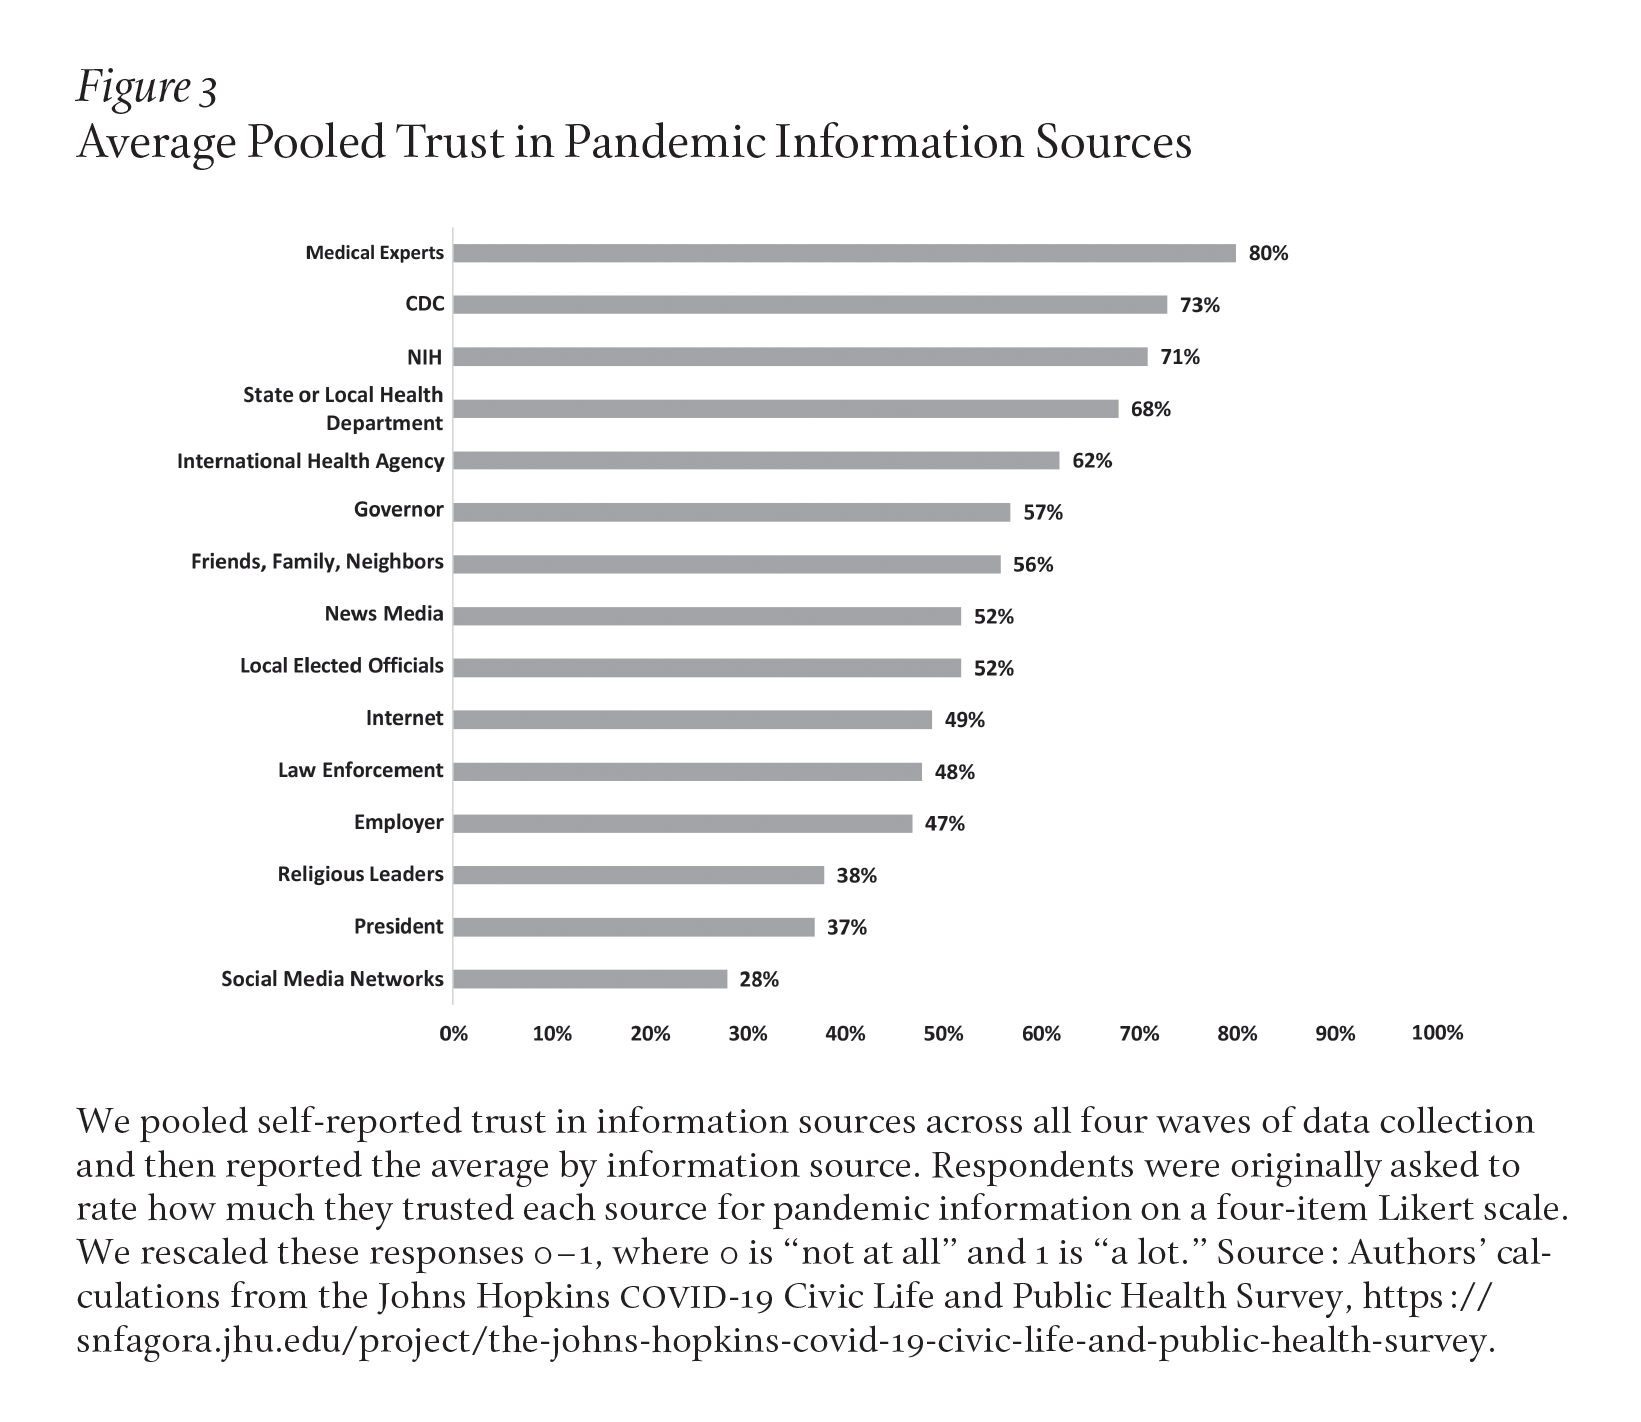 Image description: A bar chart shows the highest average rates of trust for pandemic information during the authors' study was in medical experts (80%), the CDC (73%), the NIH (71%), state or local health departments (68%), and international health agencies (62%). Caption: Respondents were originally asked to rate how much they trusted each source for pandemic information. Source: Authors’ calculations from the Johns Hopkins COVID-19 Civic Life and Public Health Survey.